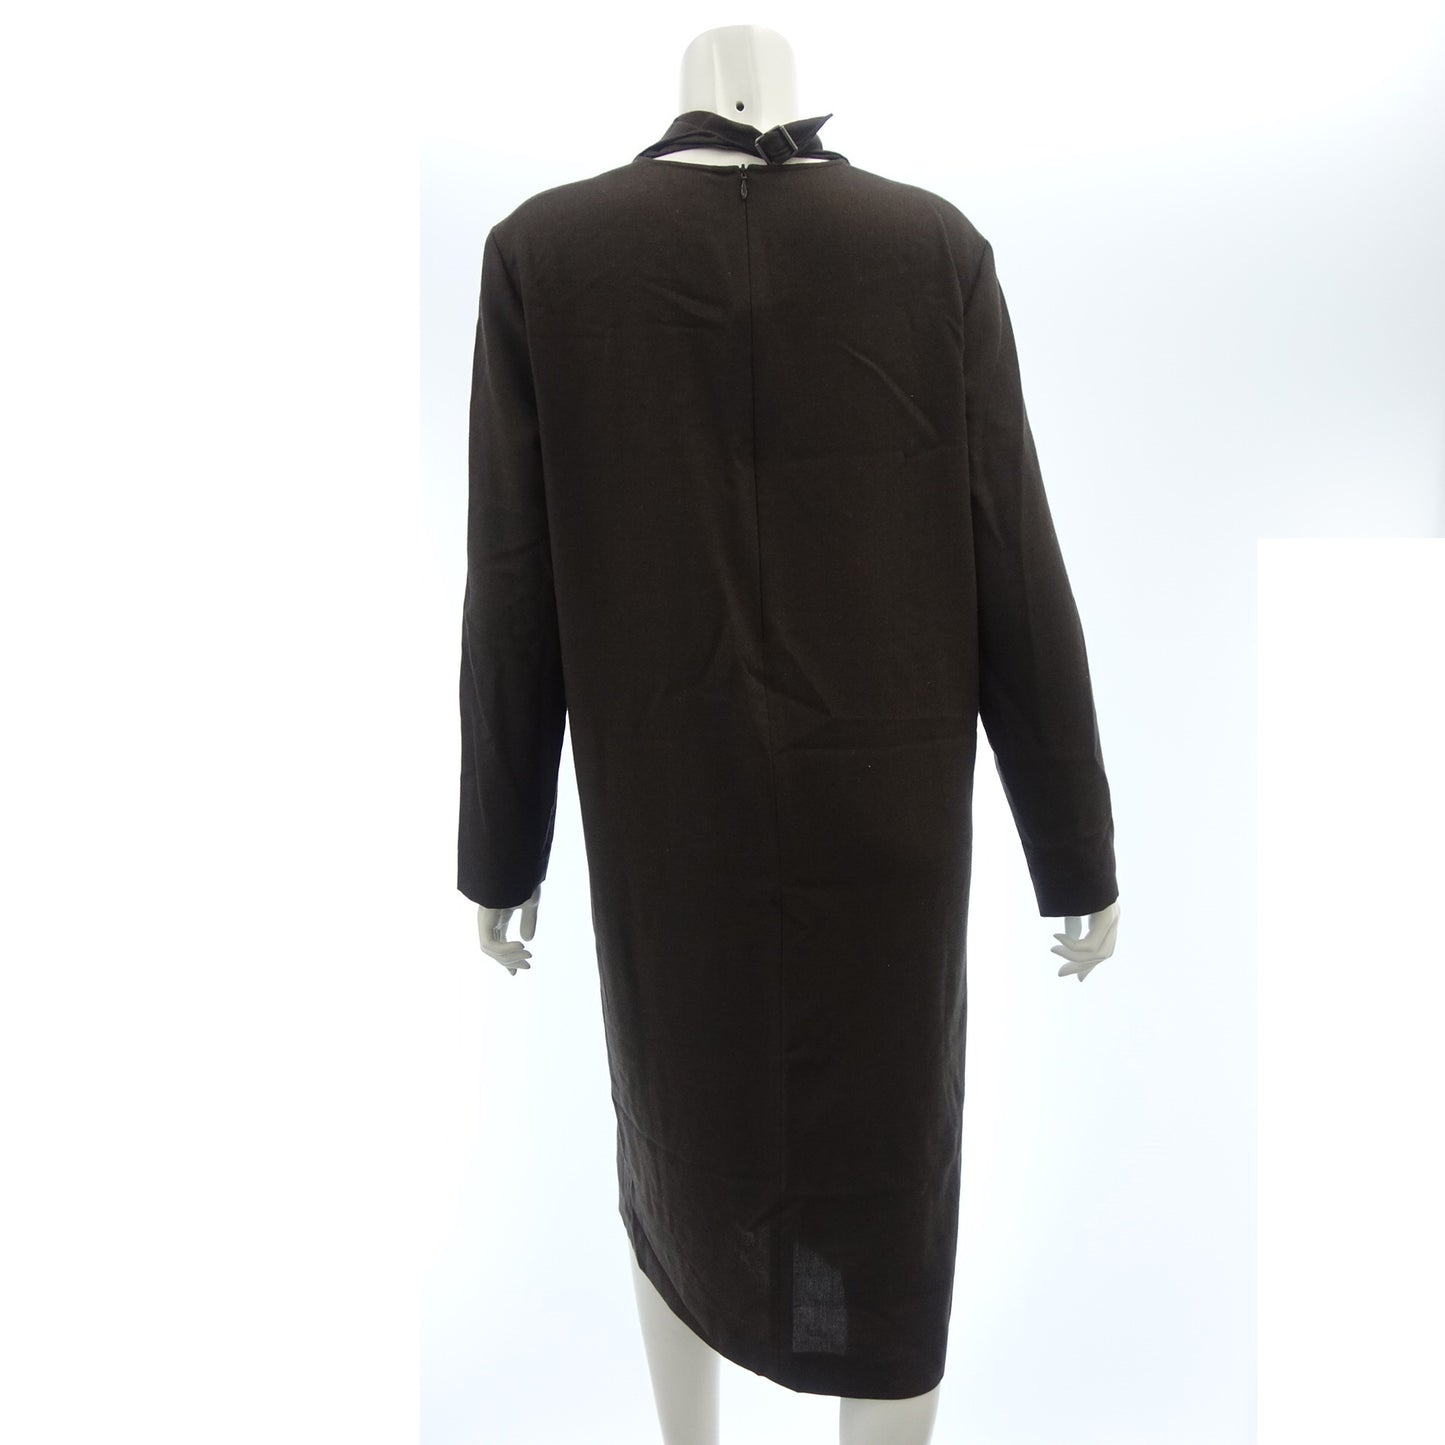 Hermes Knit Dress Zip Up Cashmere Margiela Period Women's Brown 40 HERMES [AFB25] [Used] 